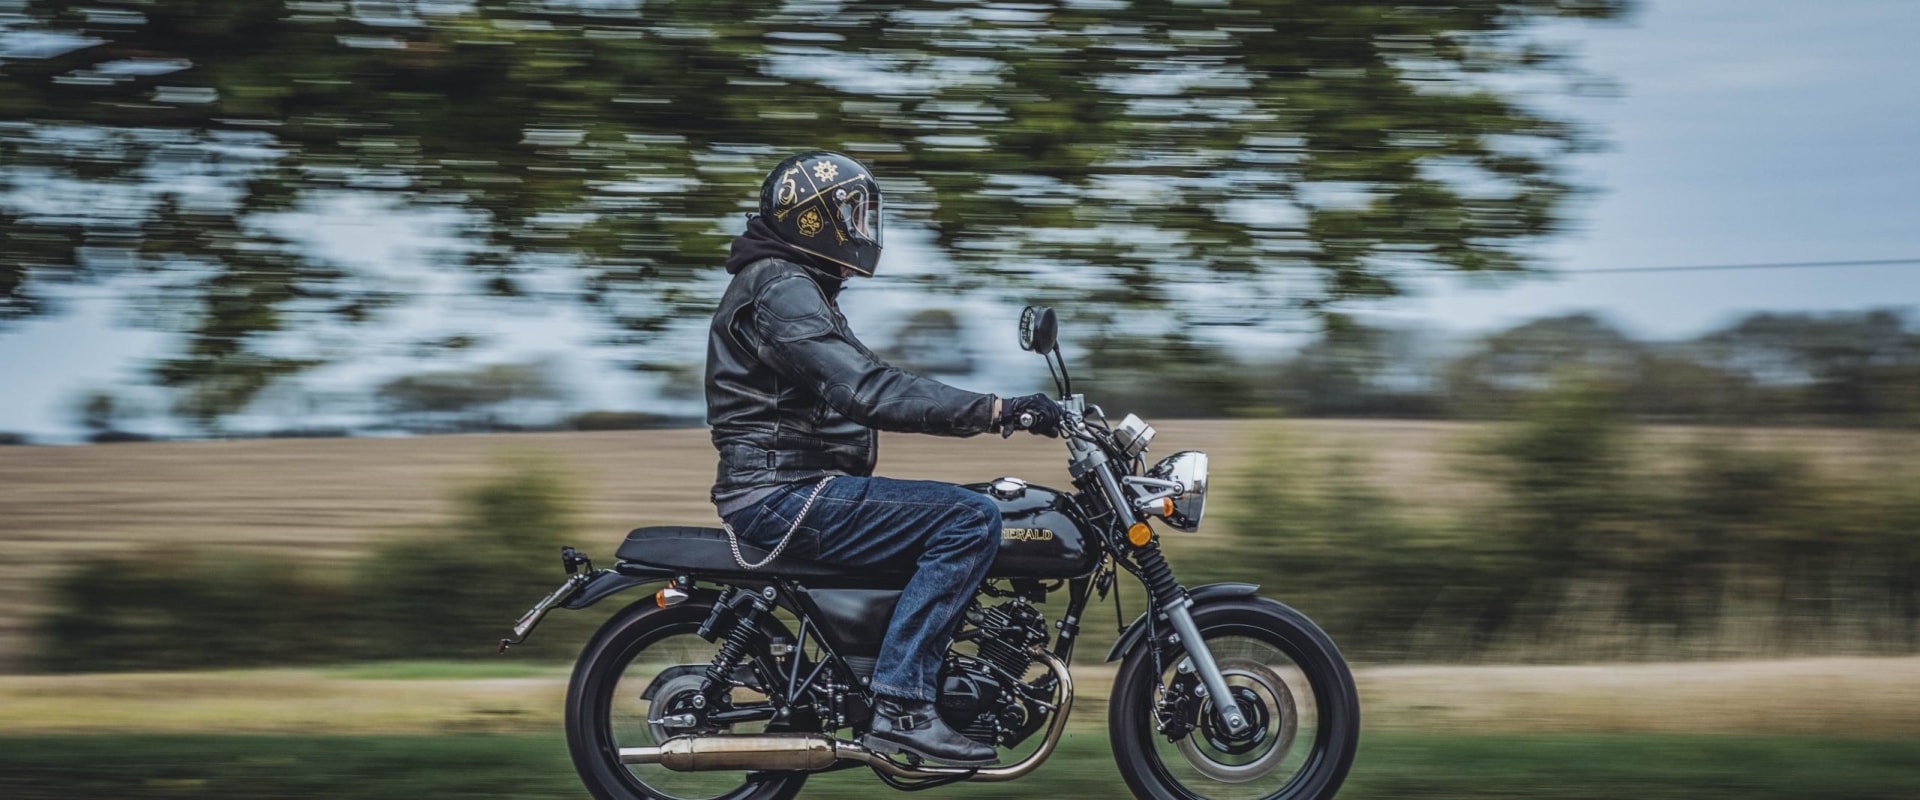 Does Motorcycle Insurance Cover High-Performance Motorcycles?